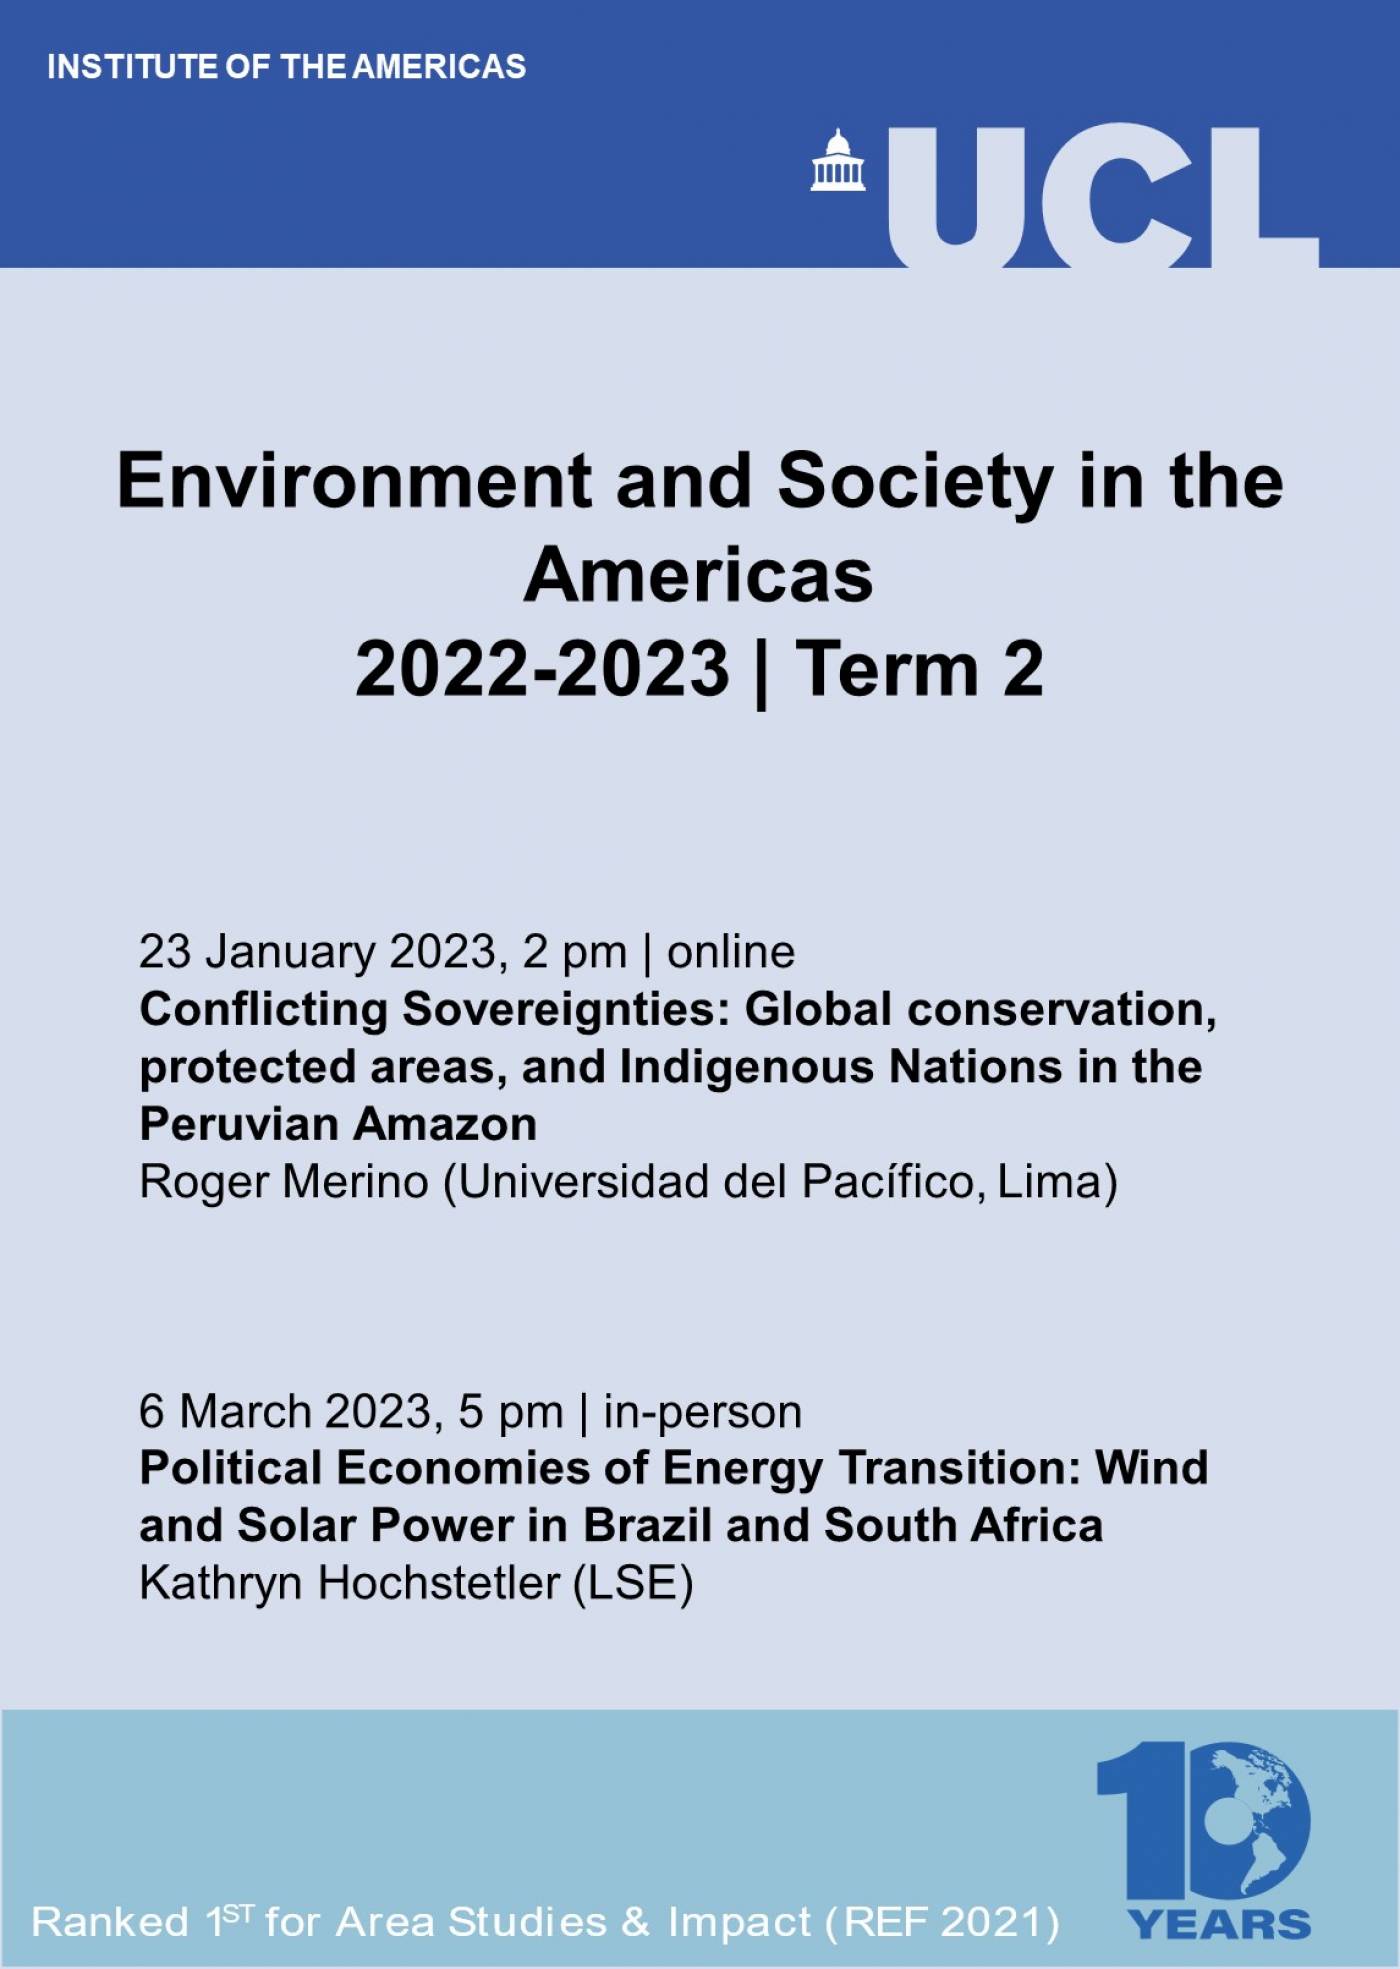 Environment and Society in the Americas event series poster - Term 2